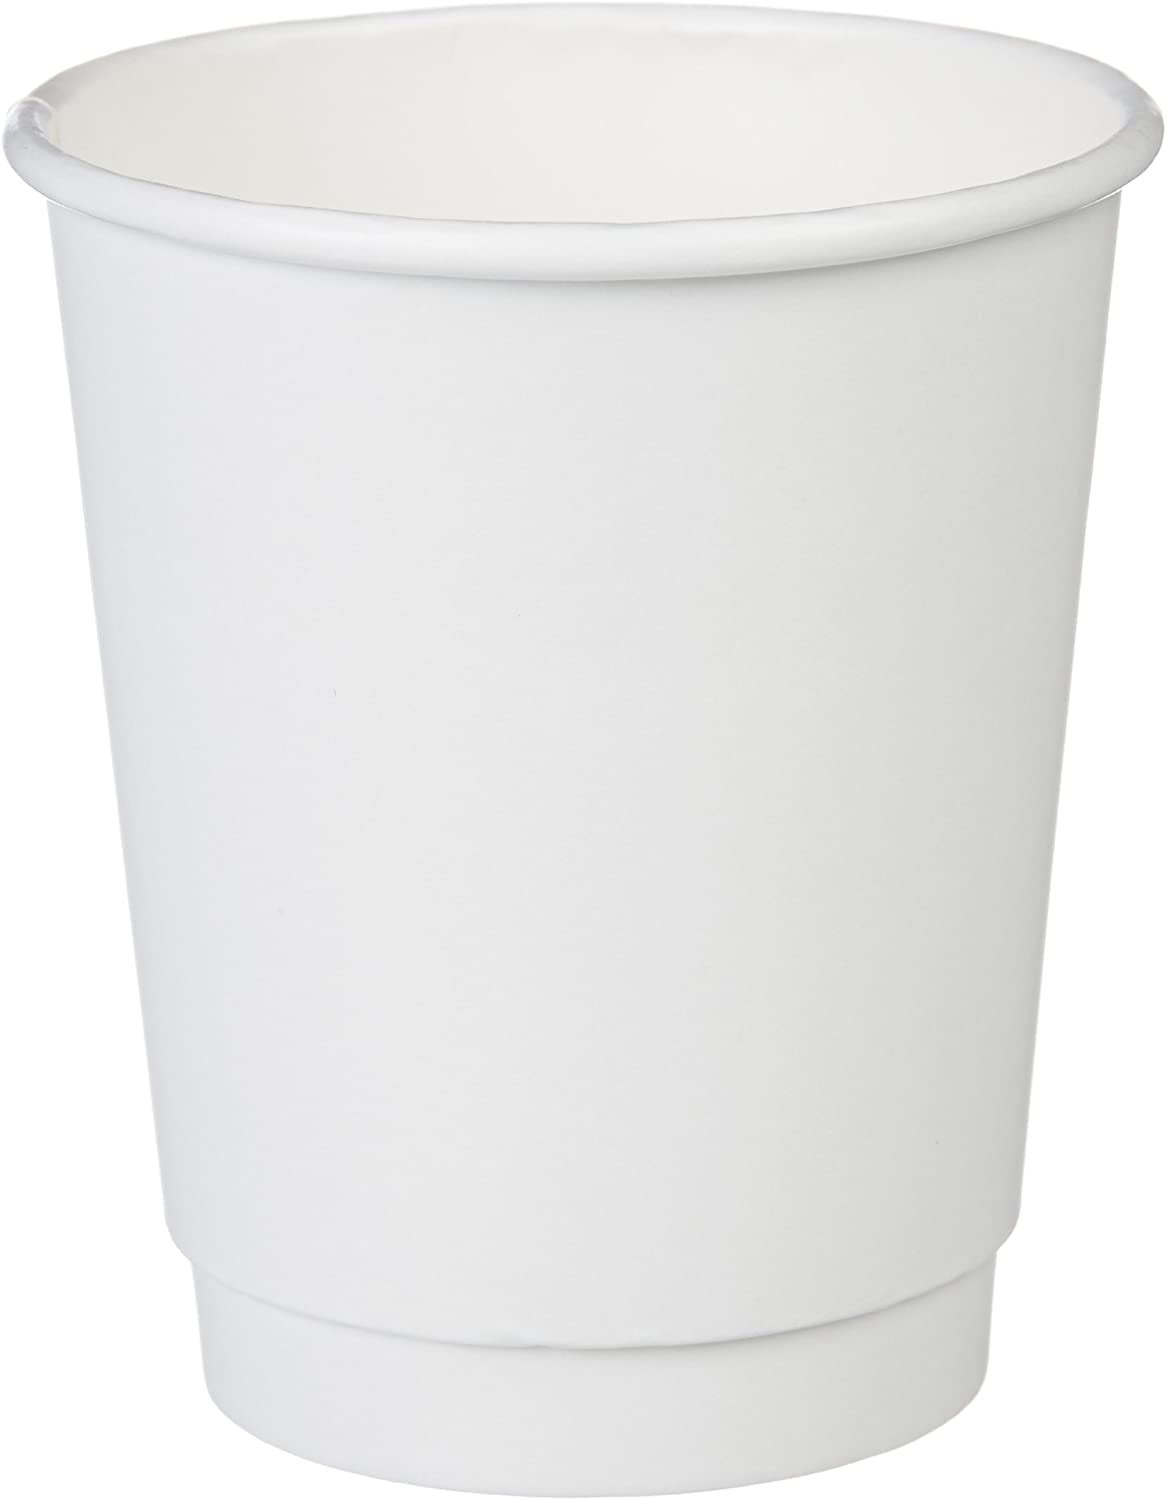 200 DIXIE PATHWAYS 45PATH WAX TREATED PAPER COLD CUPS 3oz 2 PACK 100 EACH NIB 